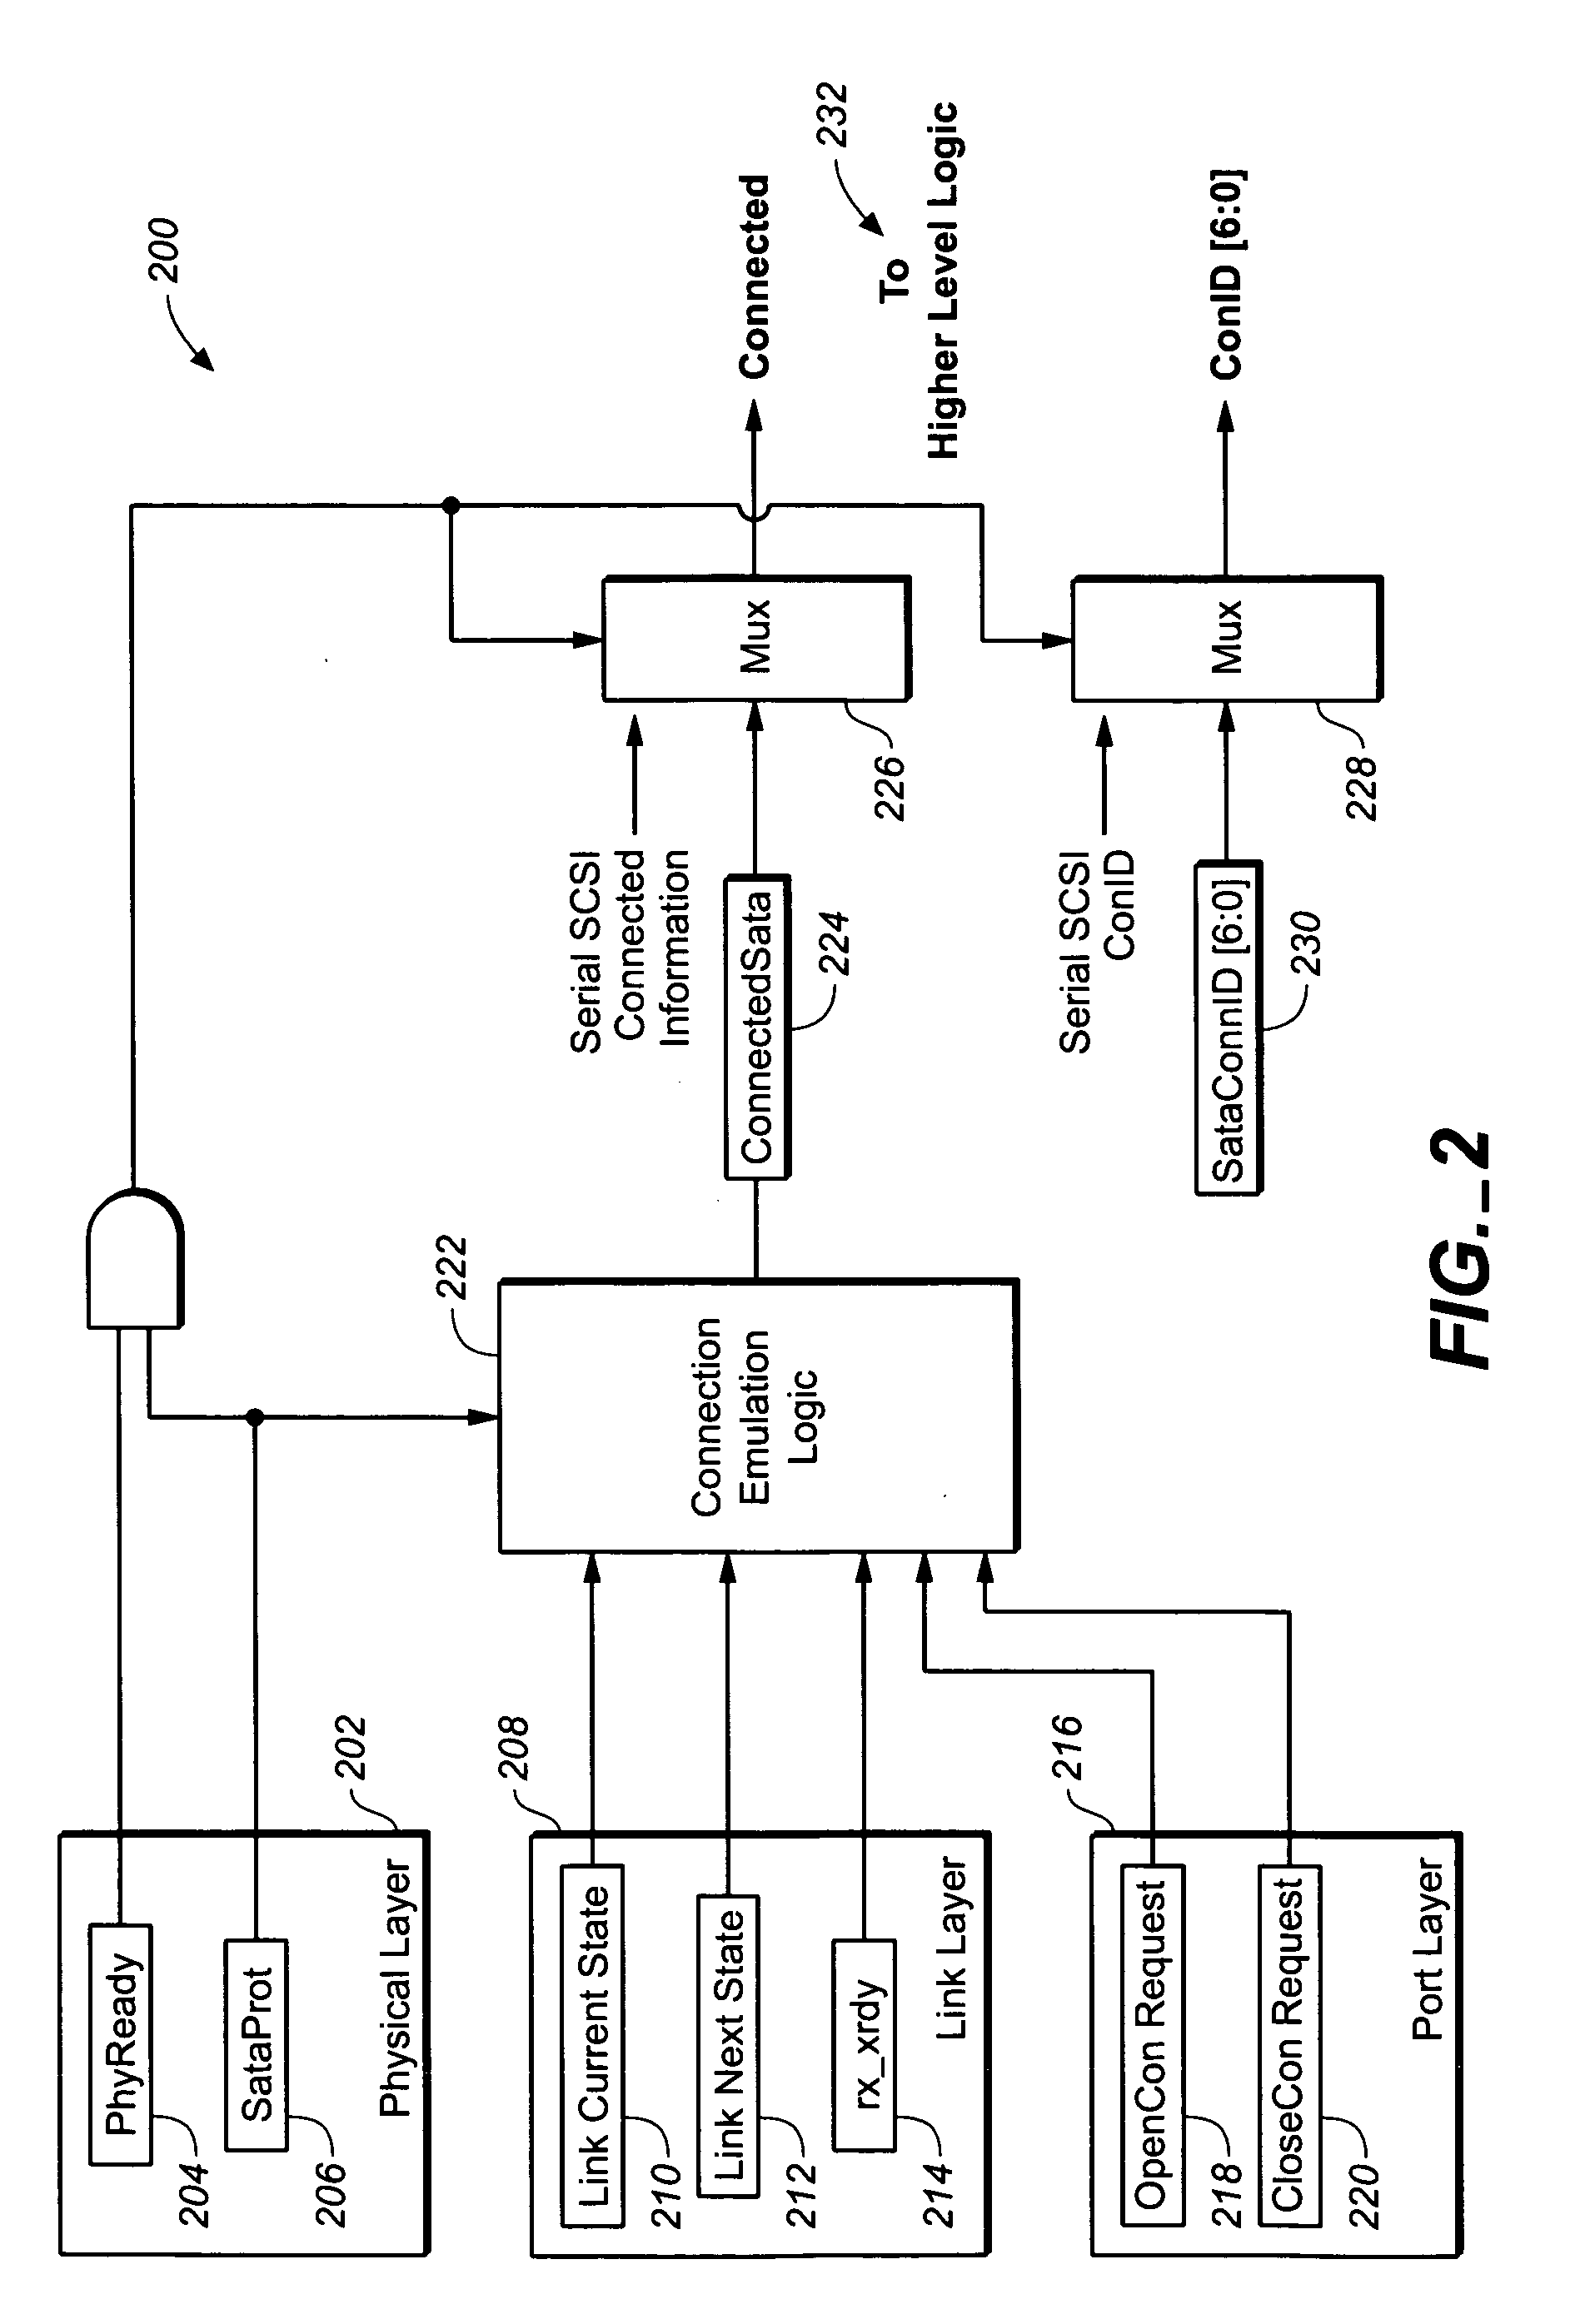 Serial attached small computer system interface (SAS) connection emulation for direct attached serial advanced technology attachemnt (SATA)